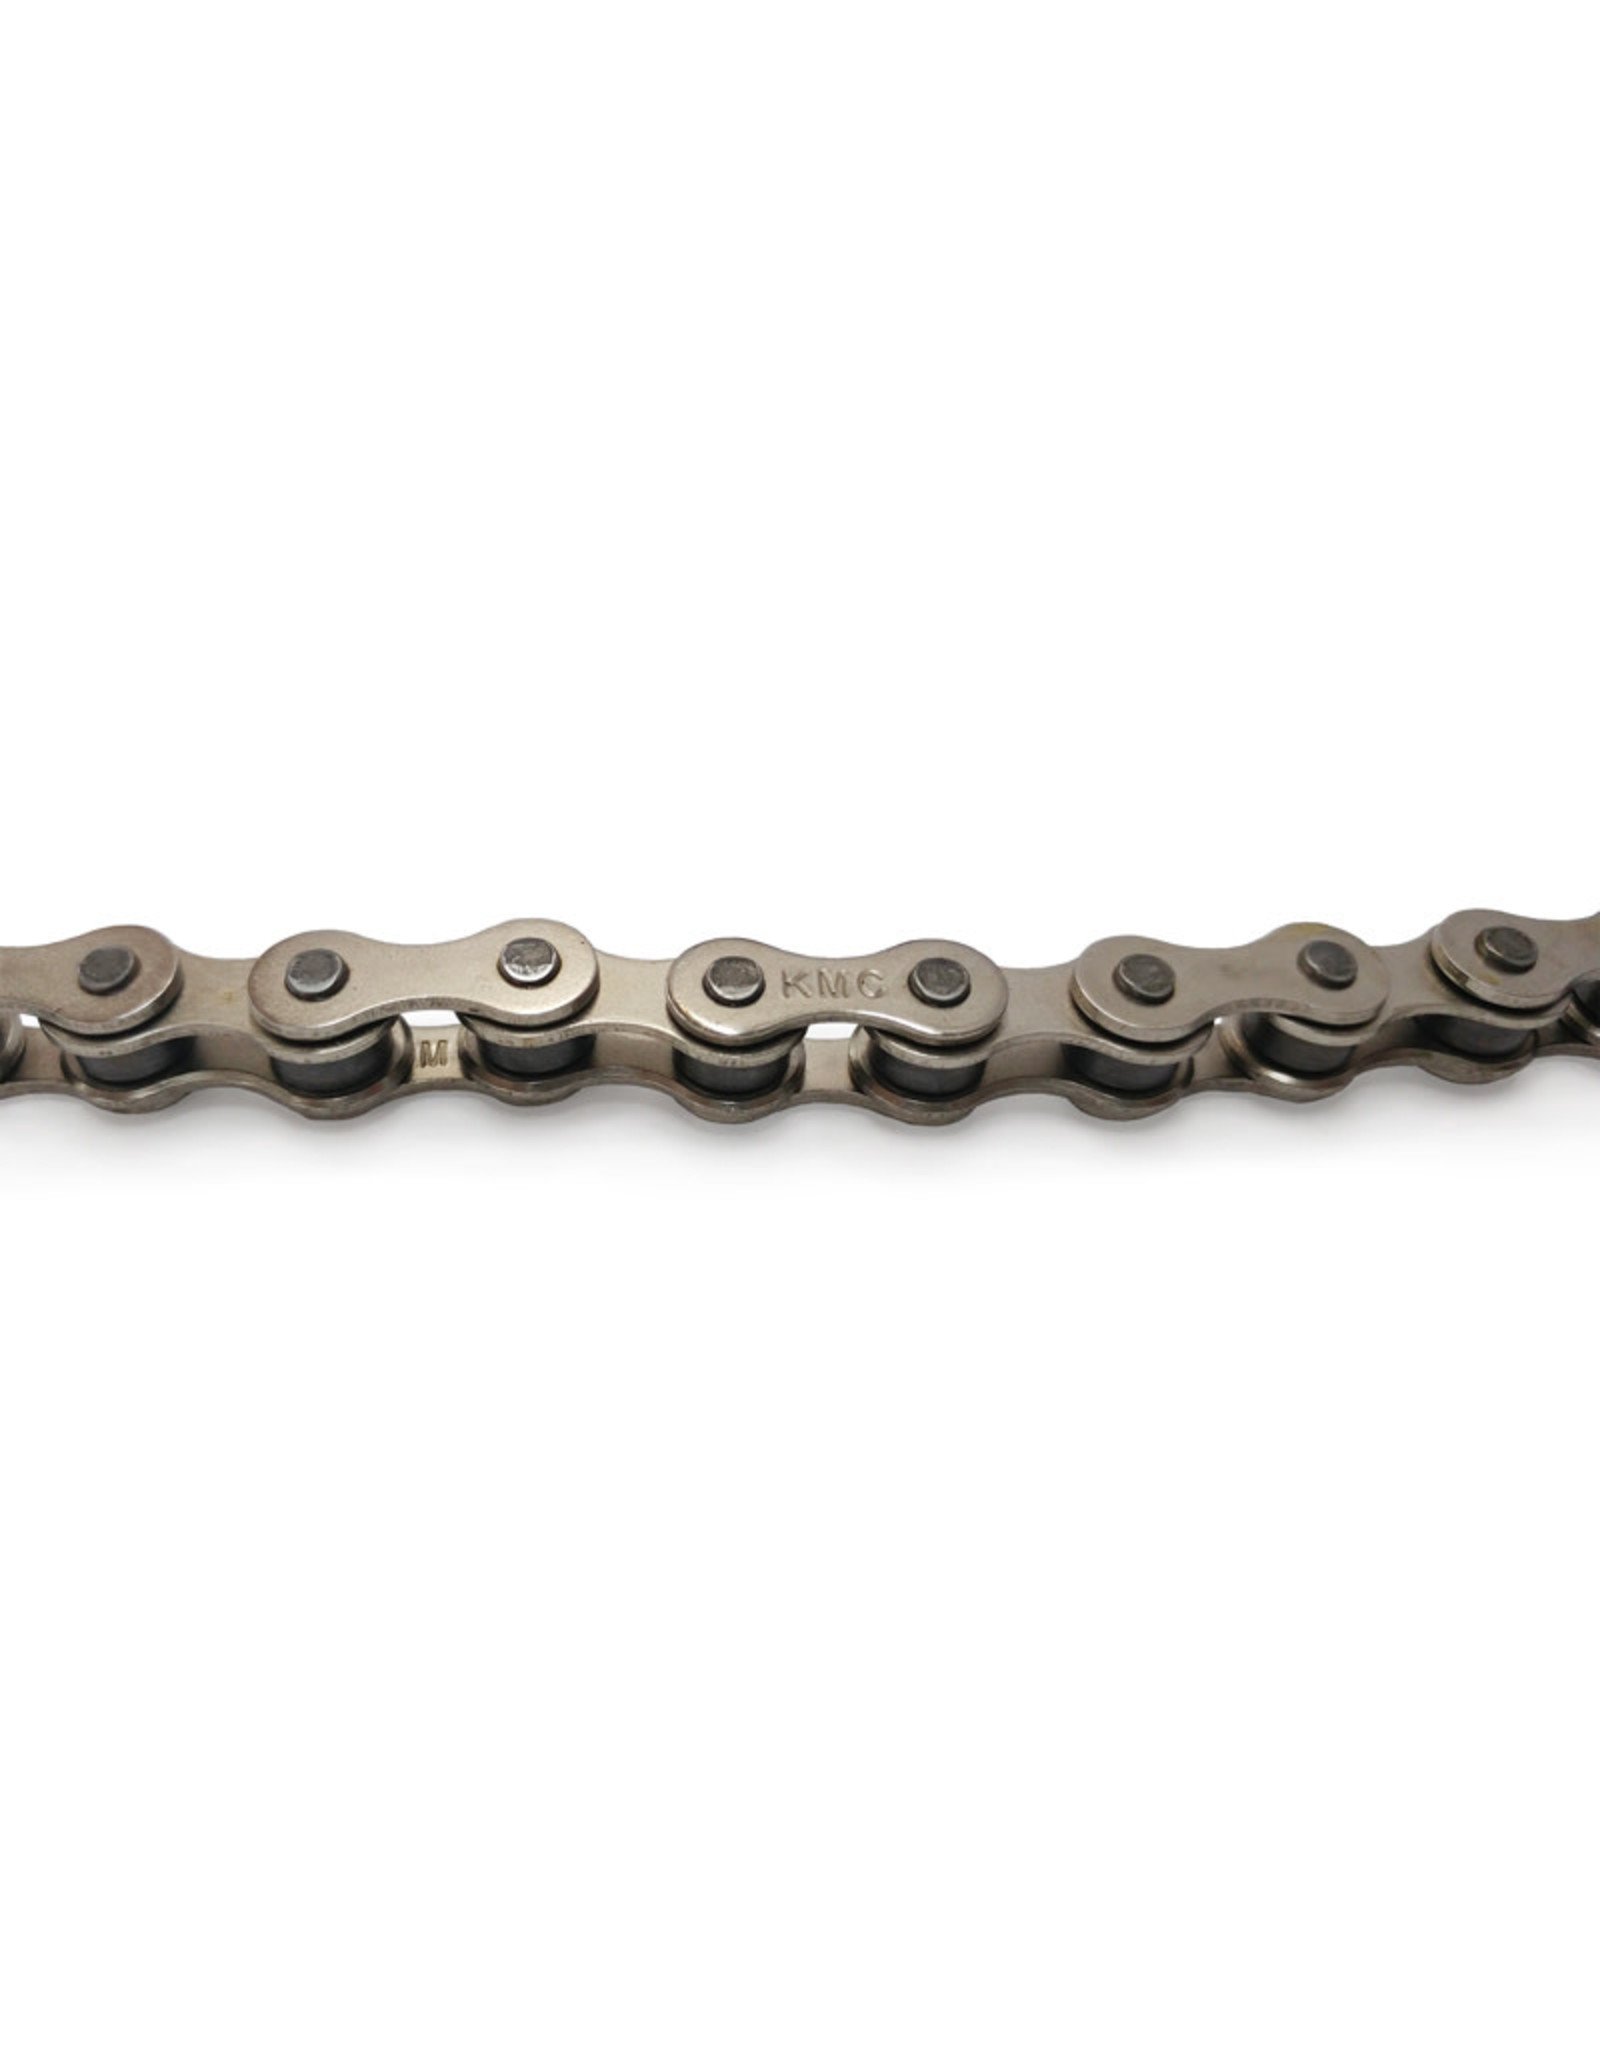 KMC 1-spindle chain 1/2 ”x 1/8” 410H 114 stitches